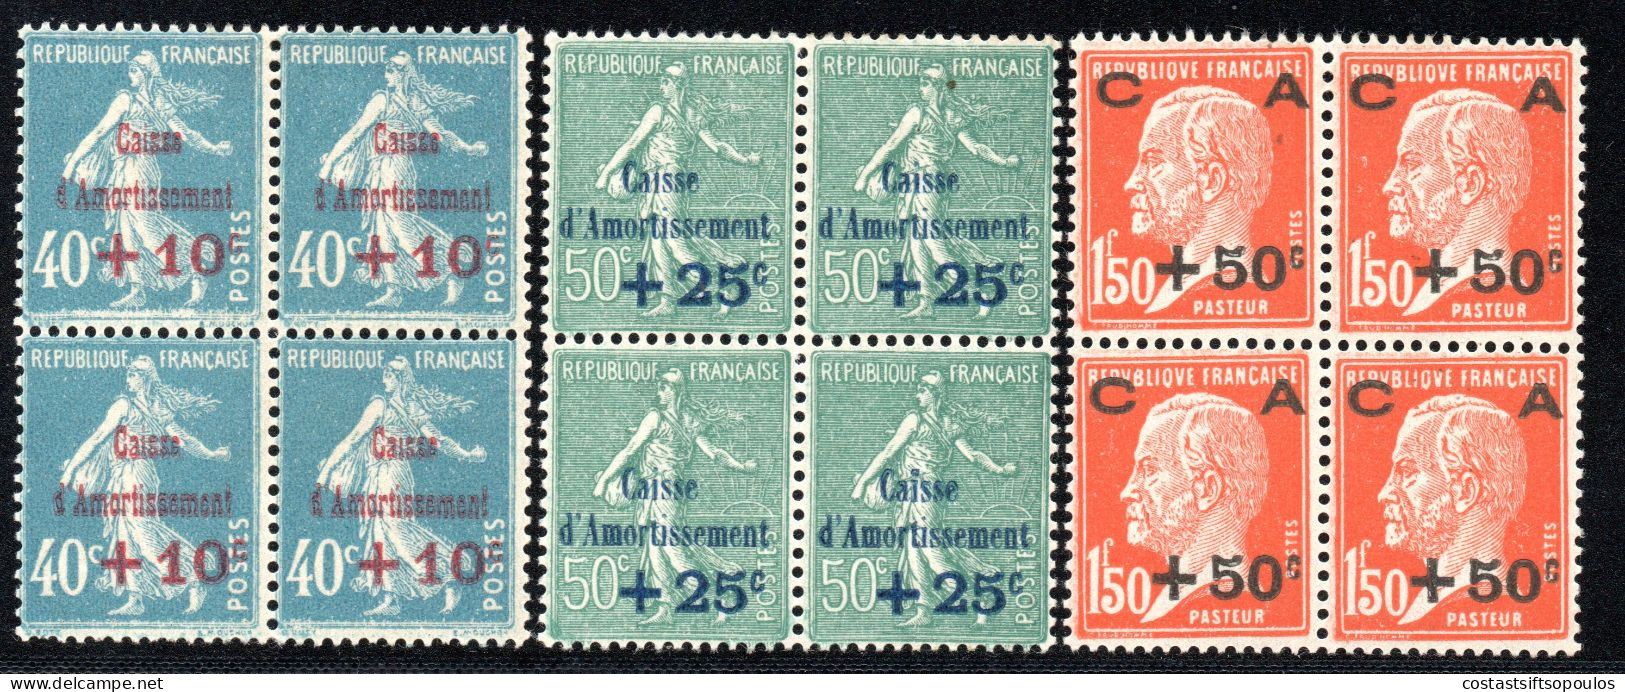 2685.FRANCE 1927 SINKING FUND Y.T.246-248,SC. B24-B26, BLOCKS OF 4, UPPER PAIR VERY LIGHT TRACES OF HINGE,LOWER MNH - 1927-31 Sinking Fund